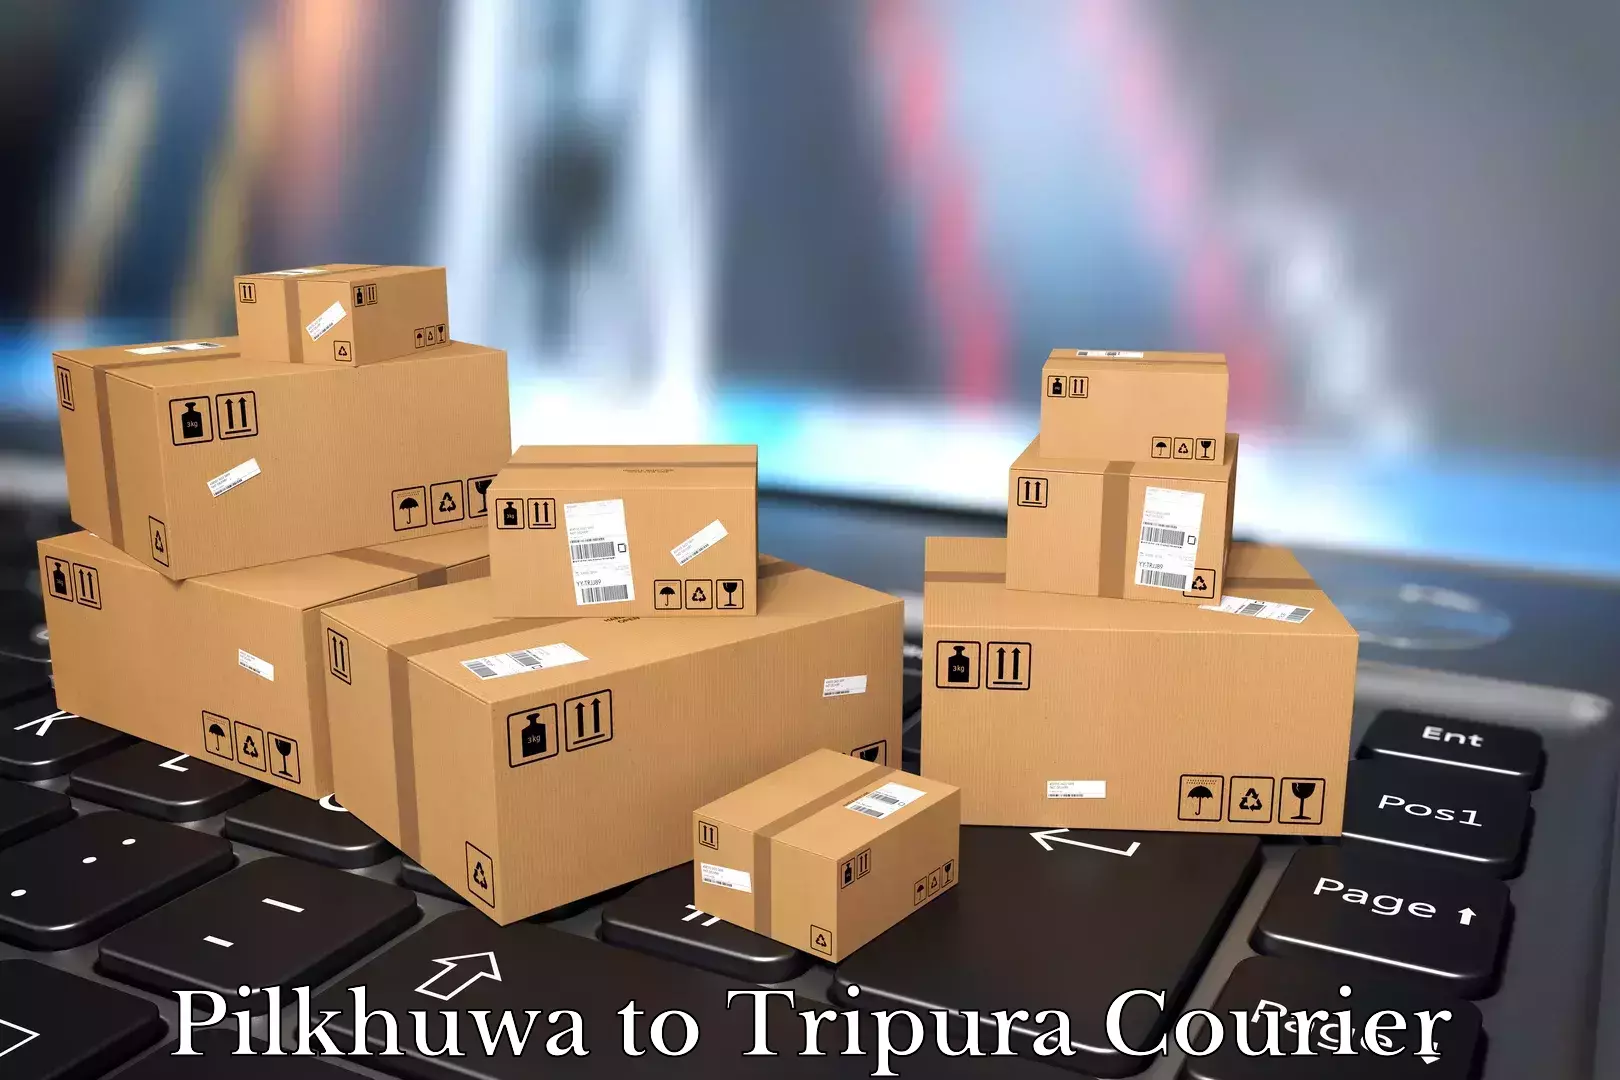 Furniture delivery service Pilkhuwa to Dharmanagar